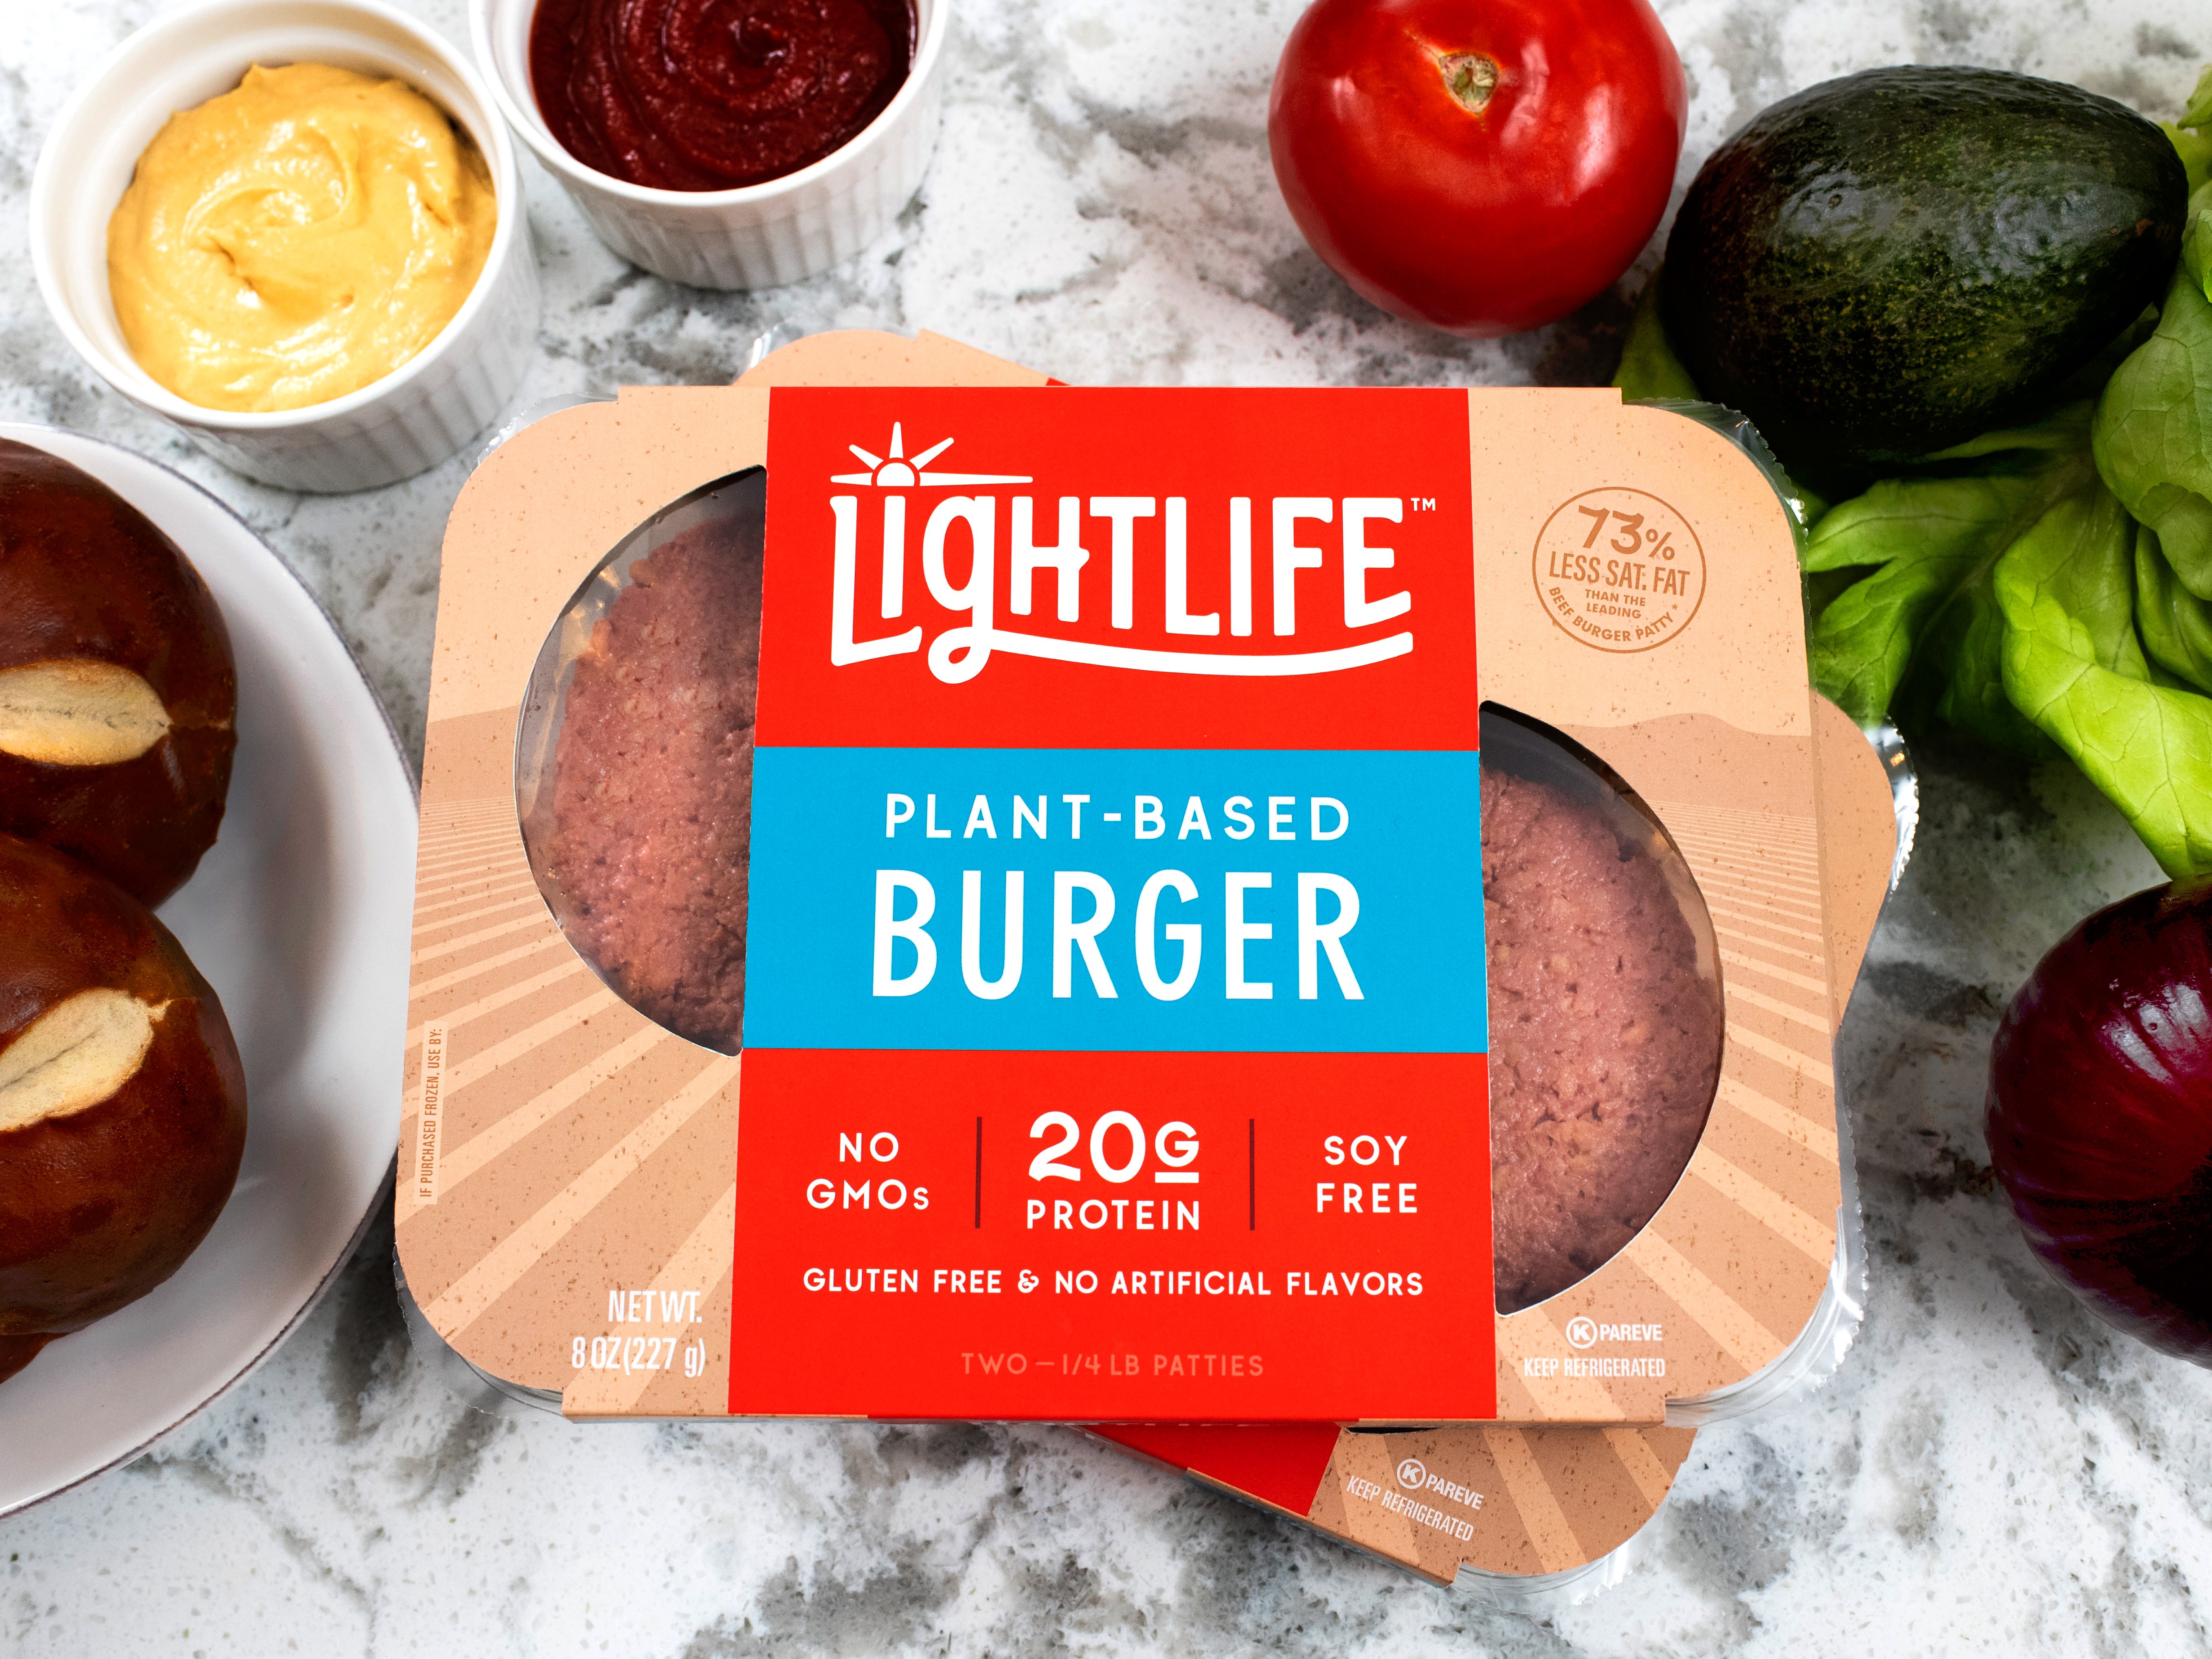 Uncooked Lightlife plant-based burgers in red, blue, and brown packaging on a marble counter surrounded by vegetables.